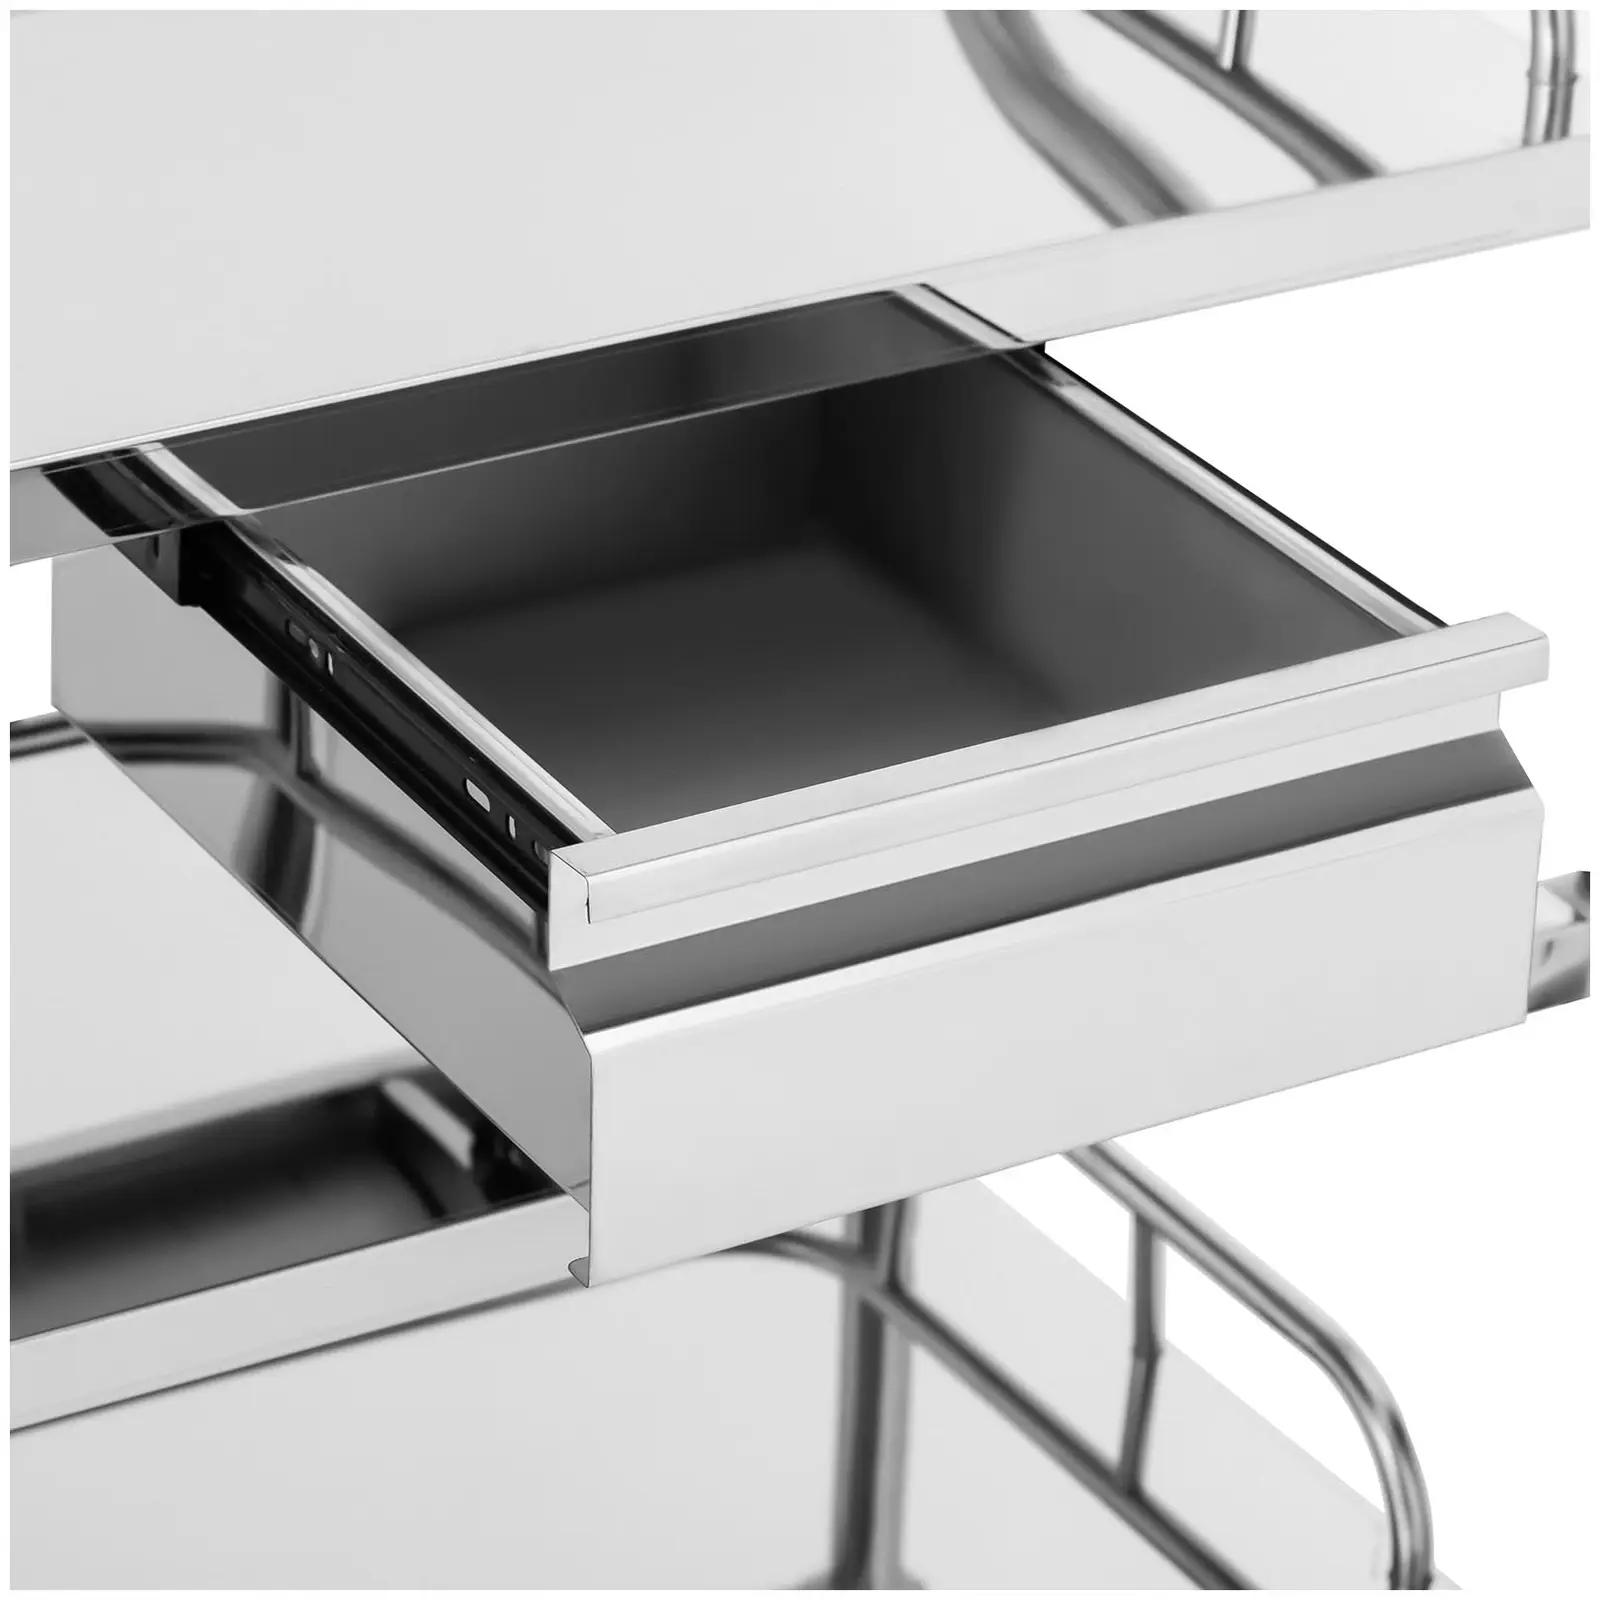 Laboratory Trolley - stainless steel - 3 shelves each 61 x 40 x 13 cm - 1 drawer - 15 kg